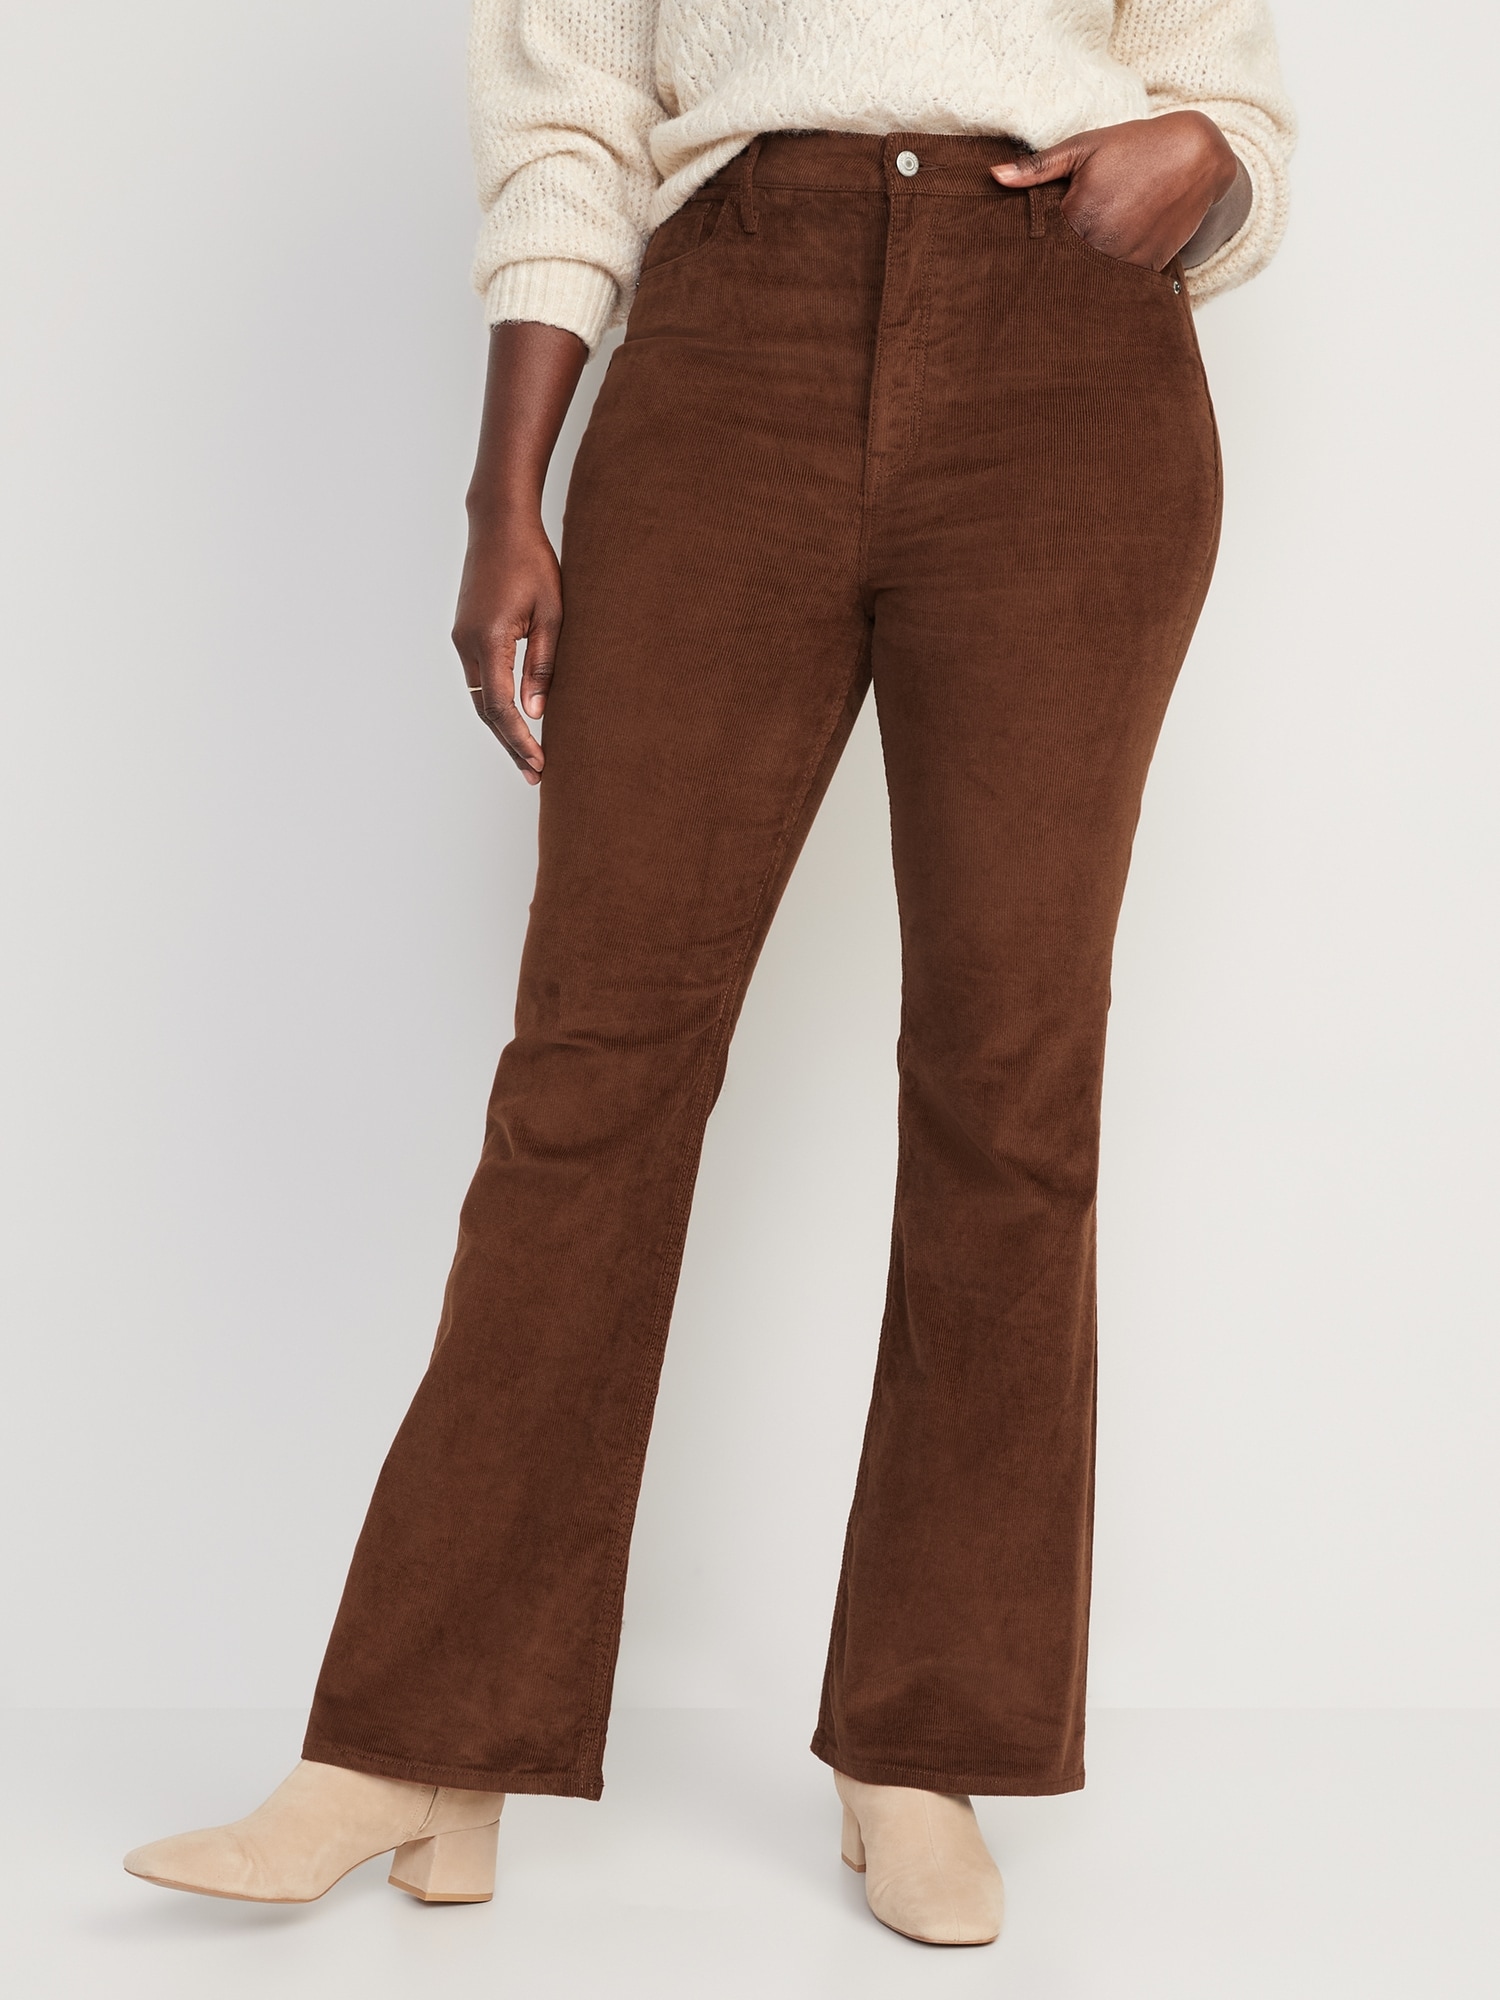 Old Navy Women's Higher High-Waisted Flare Corduroy Pants - - Size 14